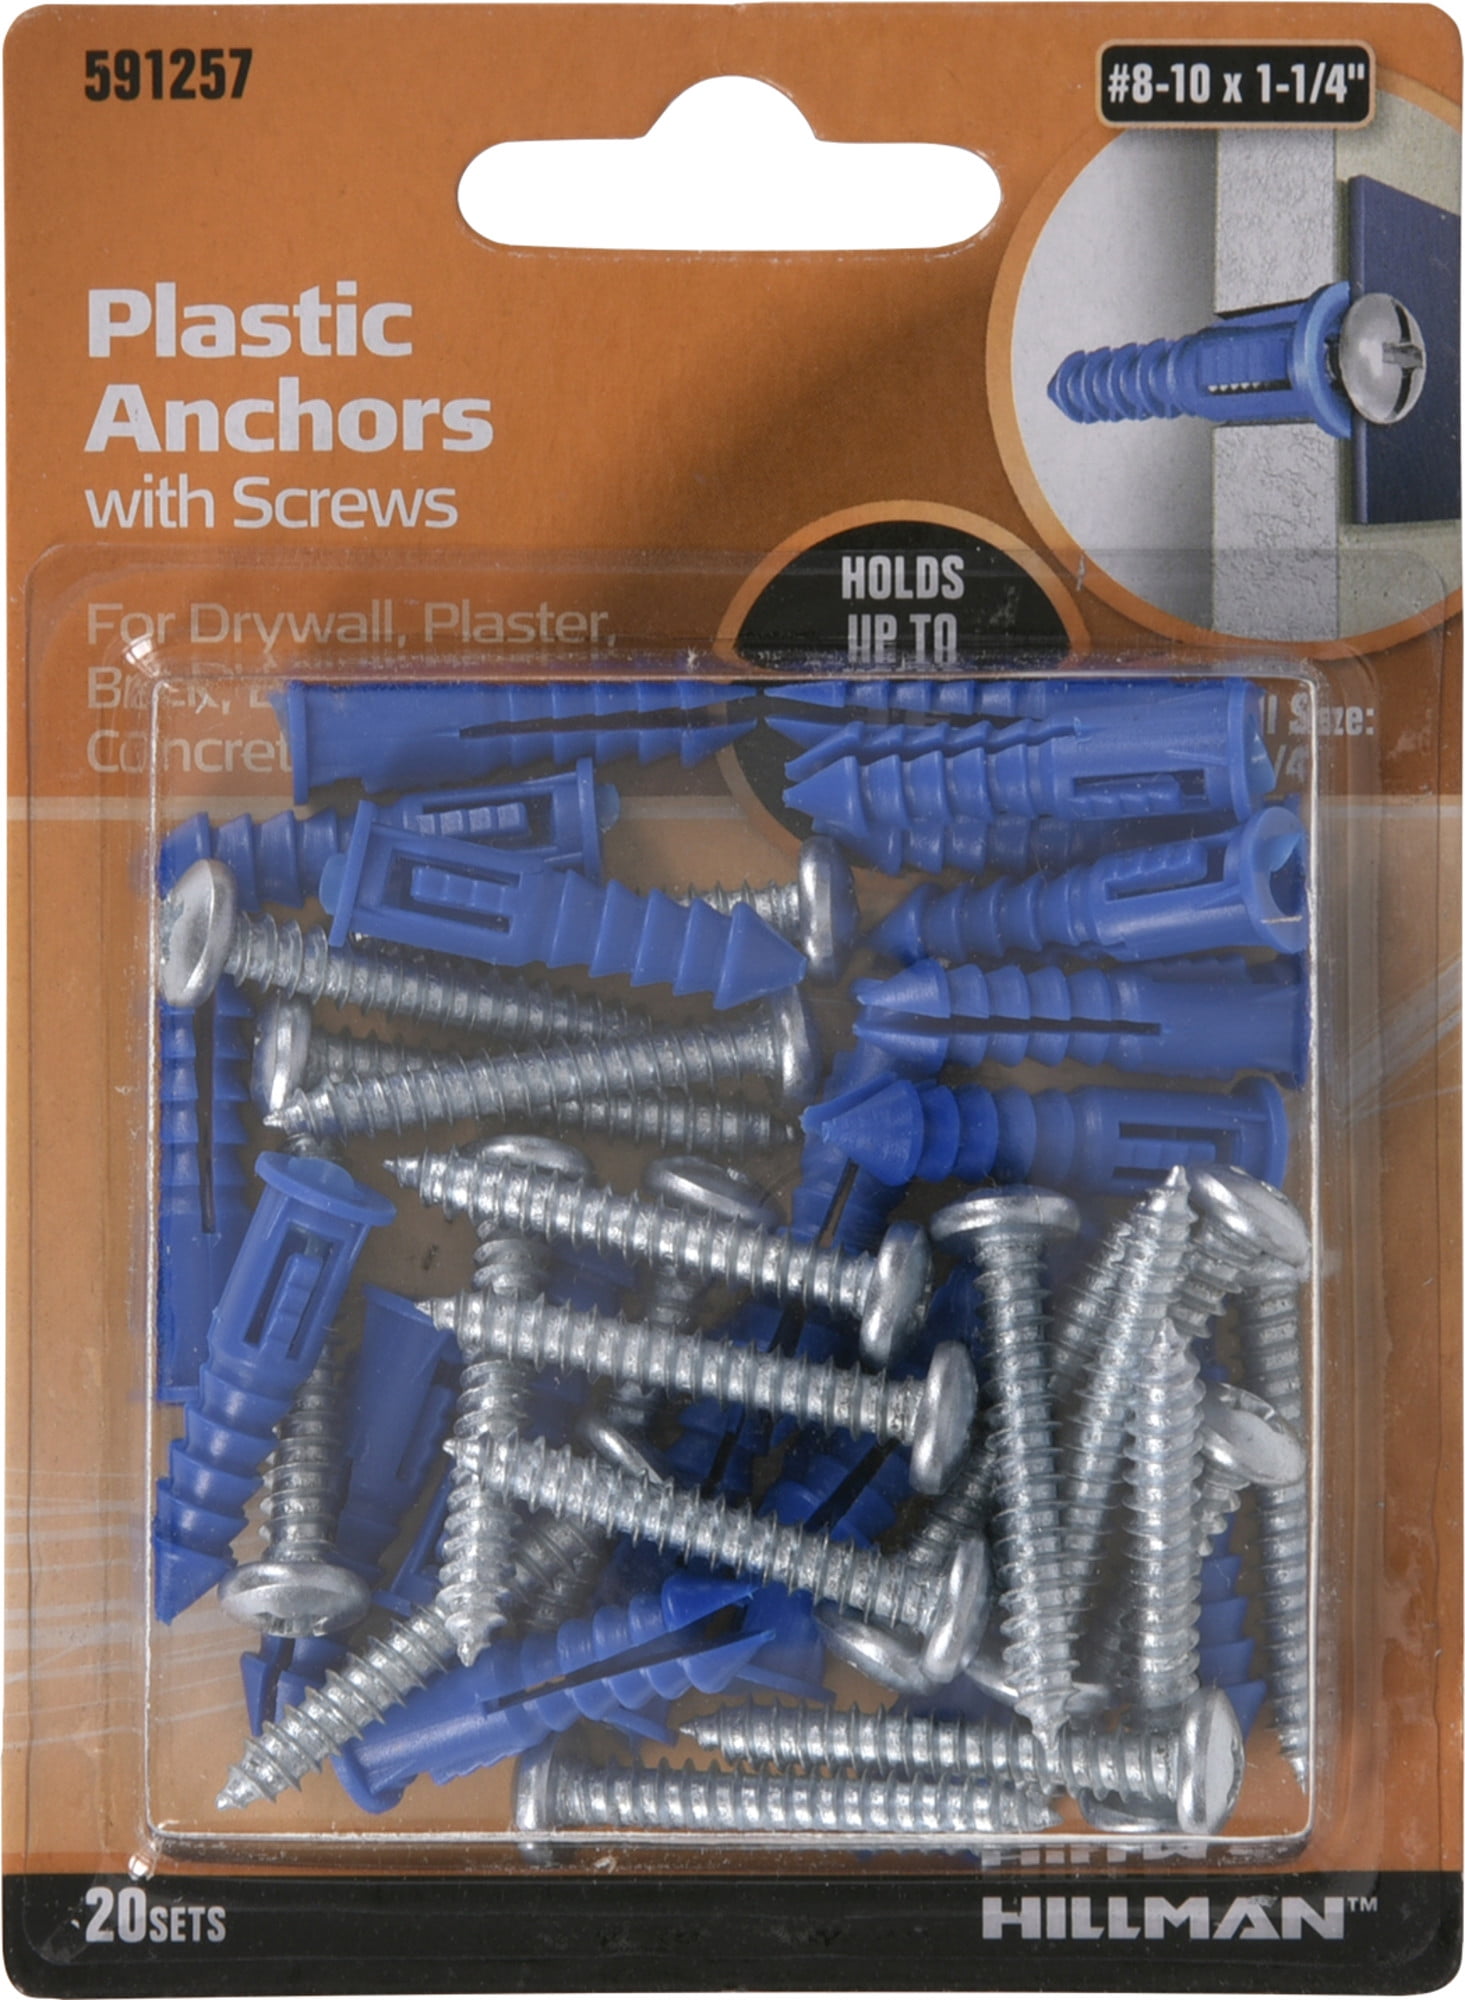 HongWay 370pcs Plastic Wall Anchors Kit with Screws Includes 5 Different Siz... 